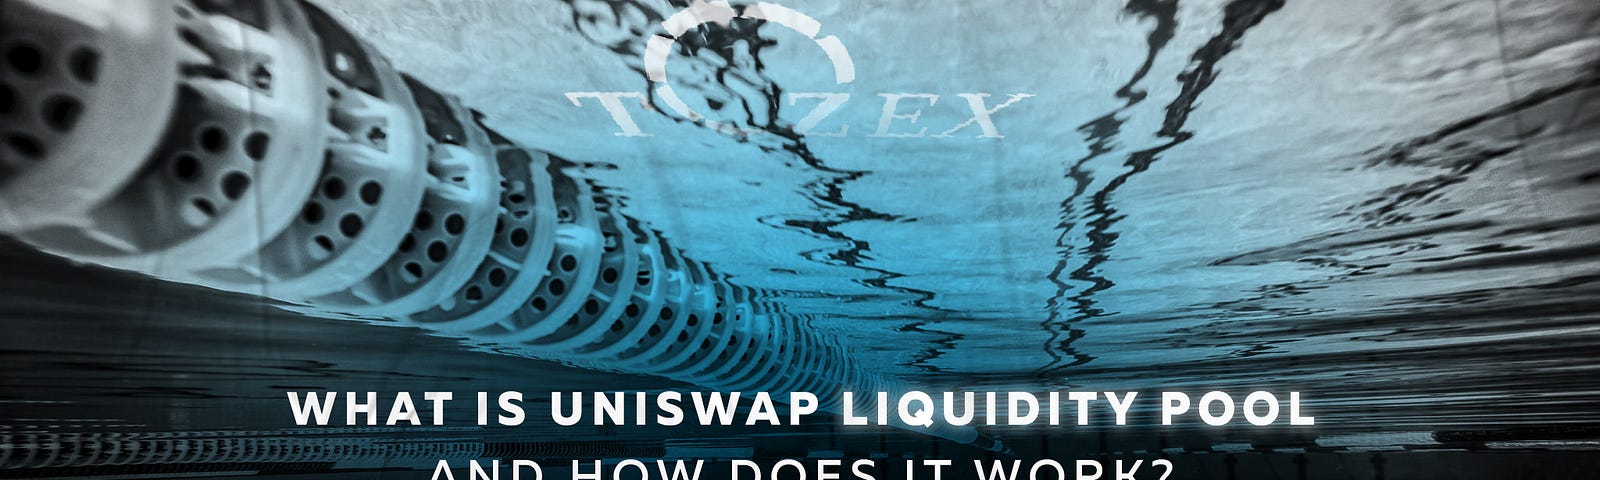 What Is Uniswap Liquidity Pool and How Does It Work?